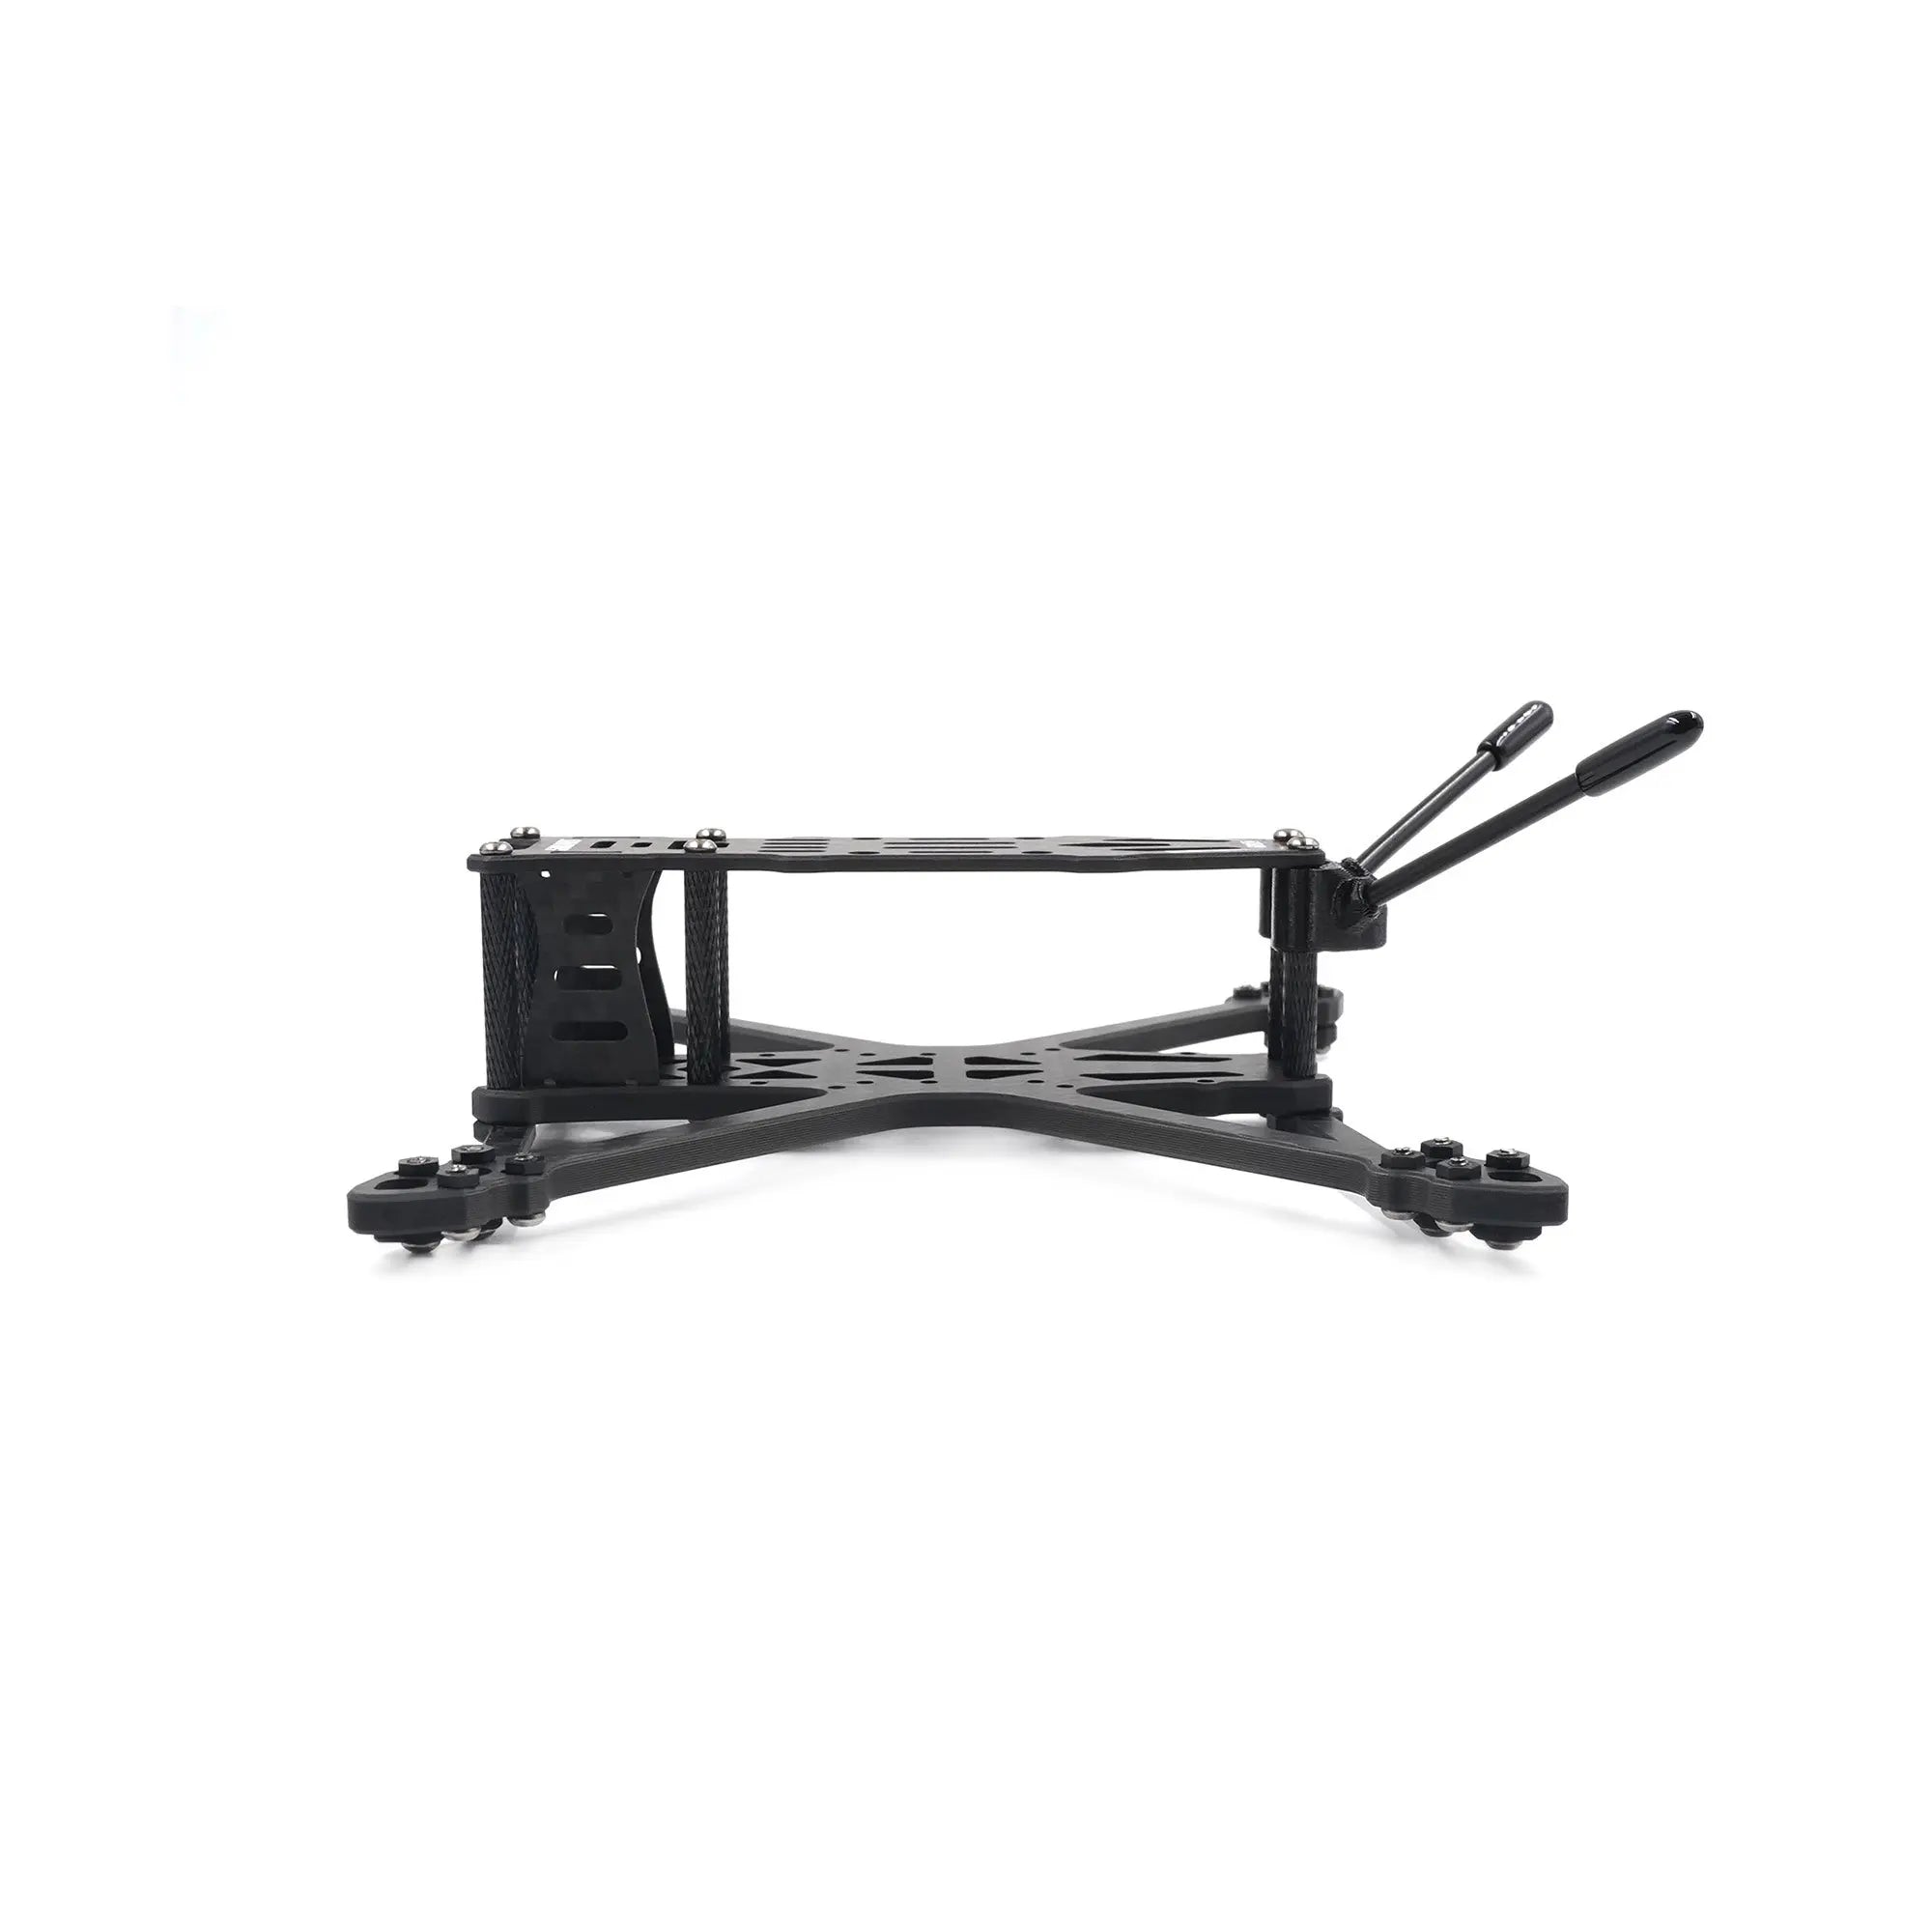 GEPRC GEP-ST35 Frame, GEP-ST35 is a 3.5inch frame with light weight . it is